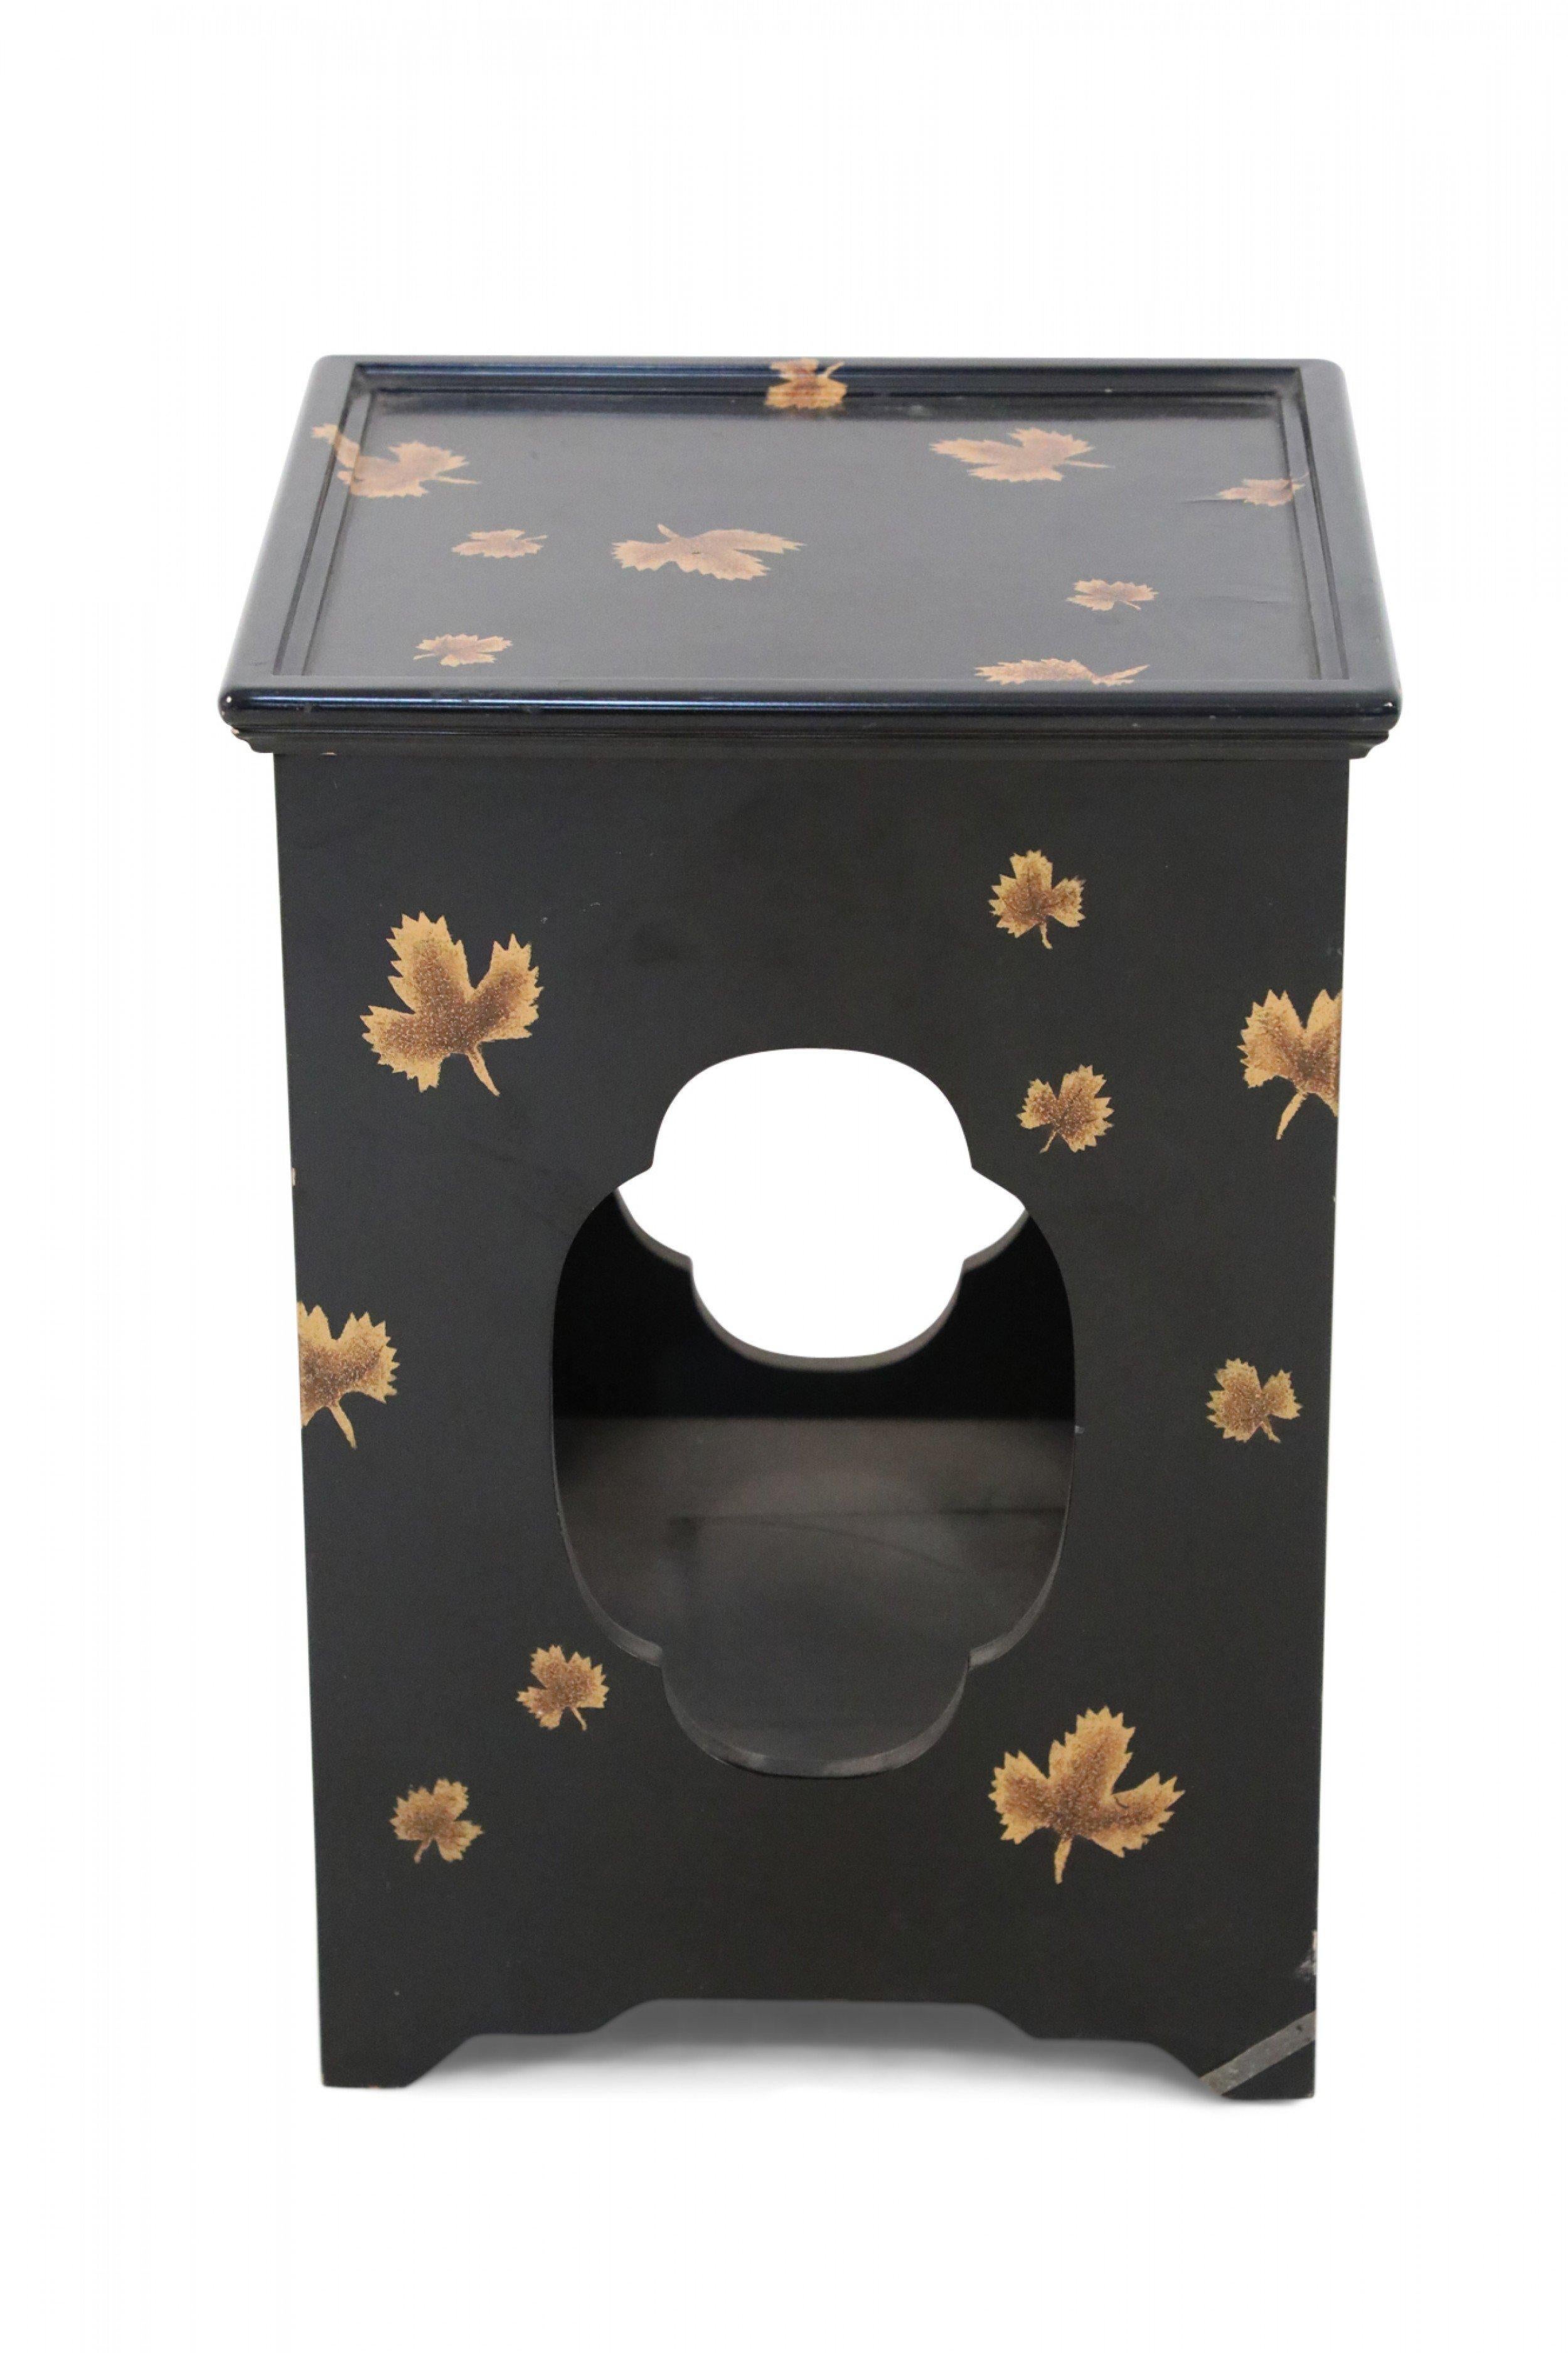 Chinese black lacquer, square side tables distinguished by quatrefoil-shaped cutouts on all sides and a gold maple leaf motif throughout (priced as pair).
  